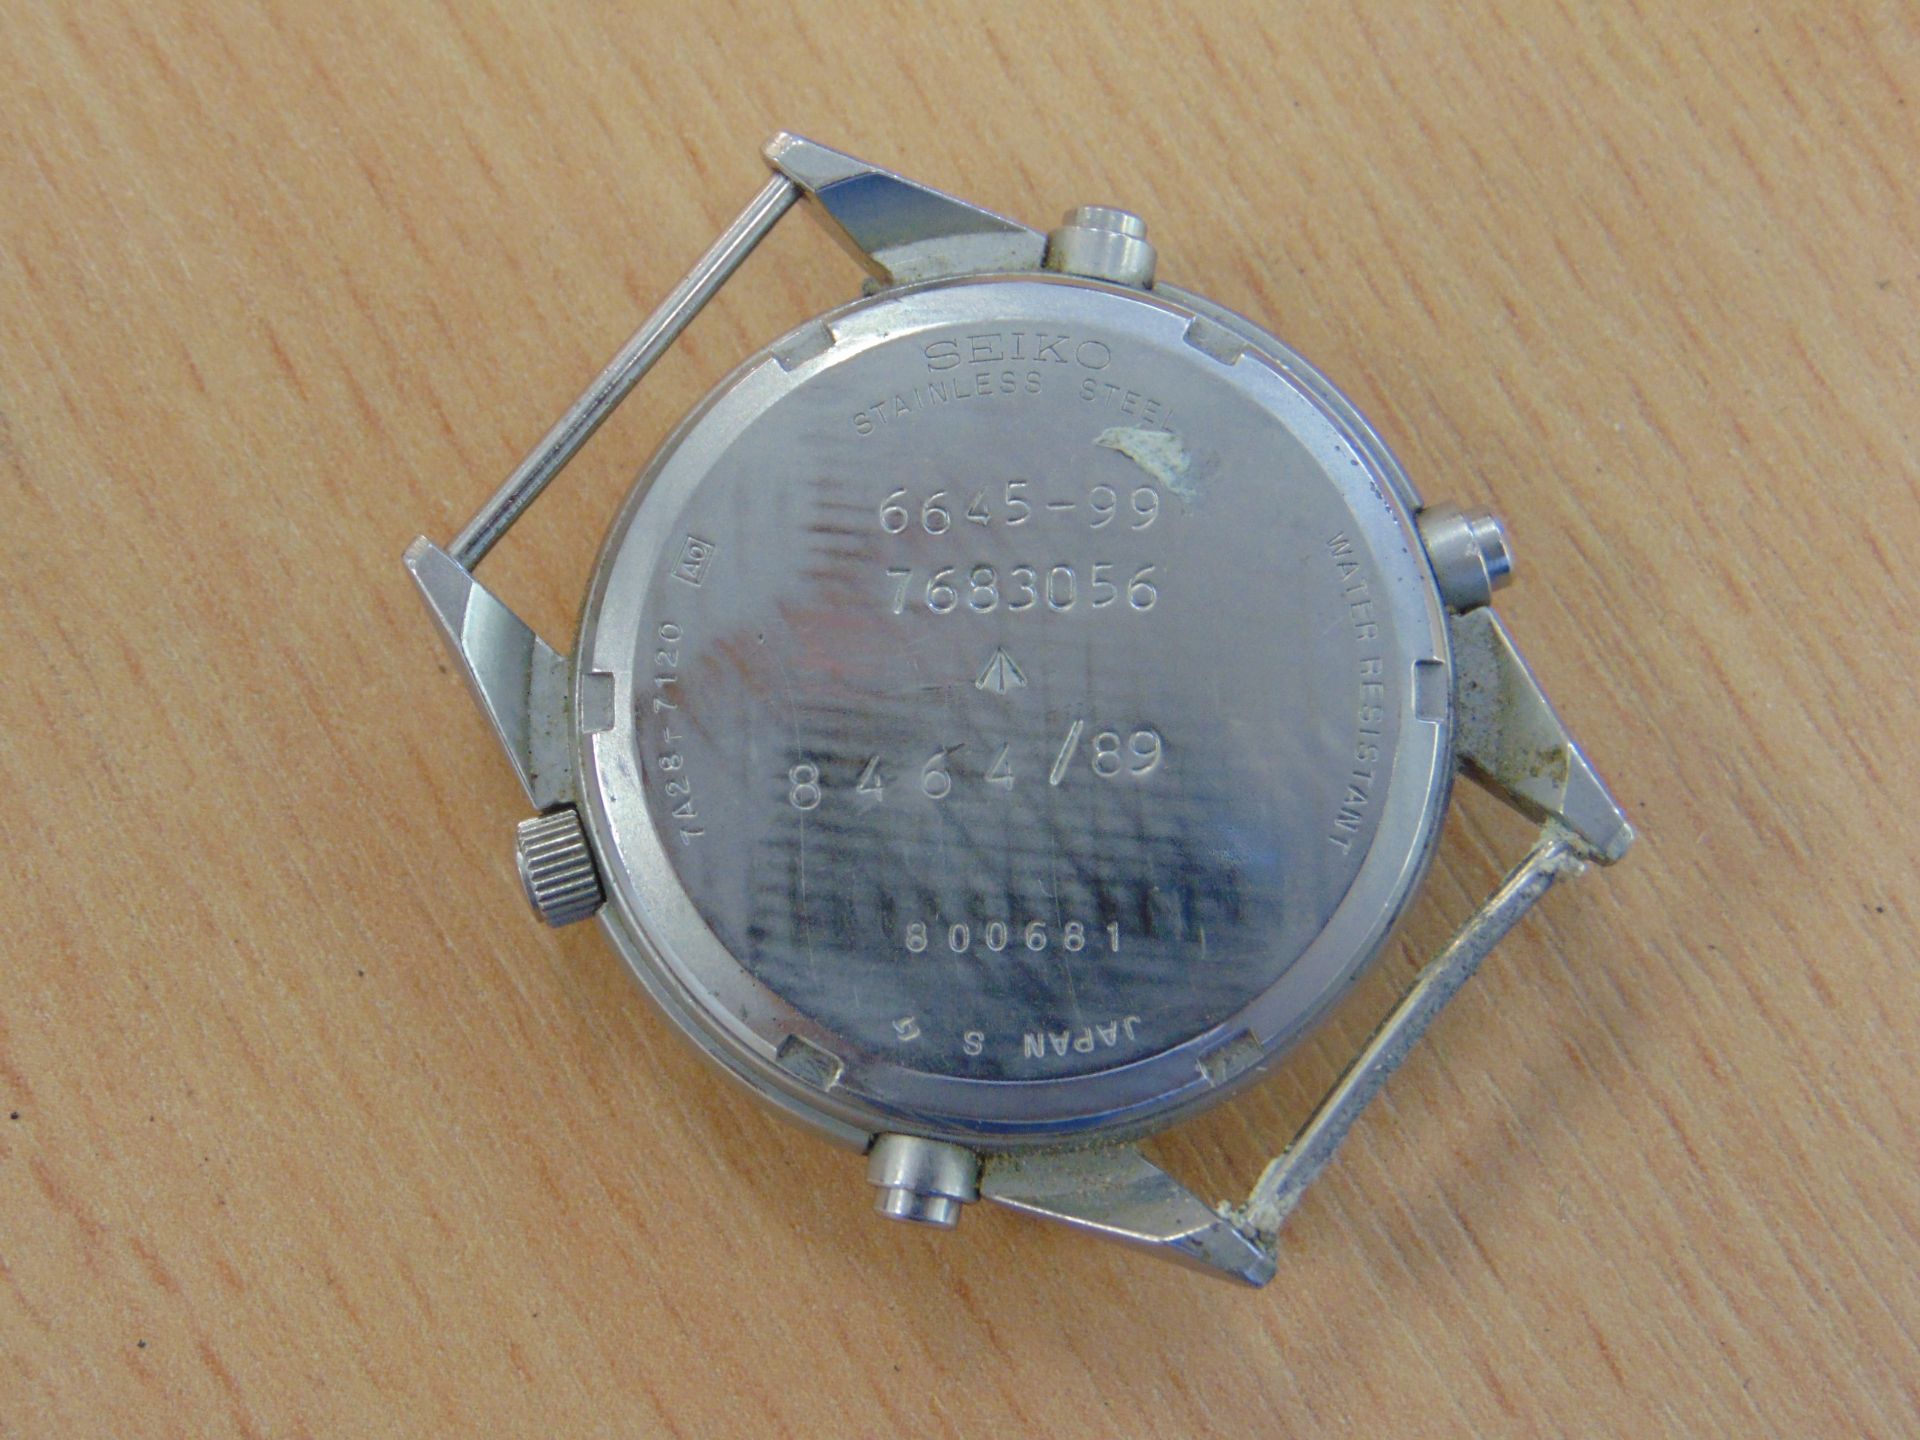 SEIKO GEN 1 PILOTS CHRONO RAF ISSUE WATCH NATO MARKINGS DATED 1989 AS ISSUED TO HARRIER FORCE - Image 7 of 10